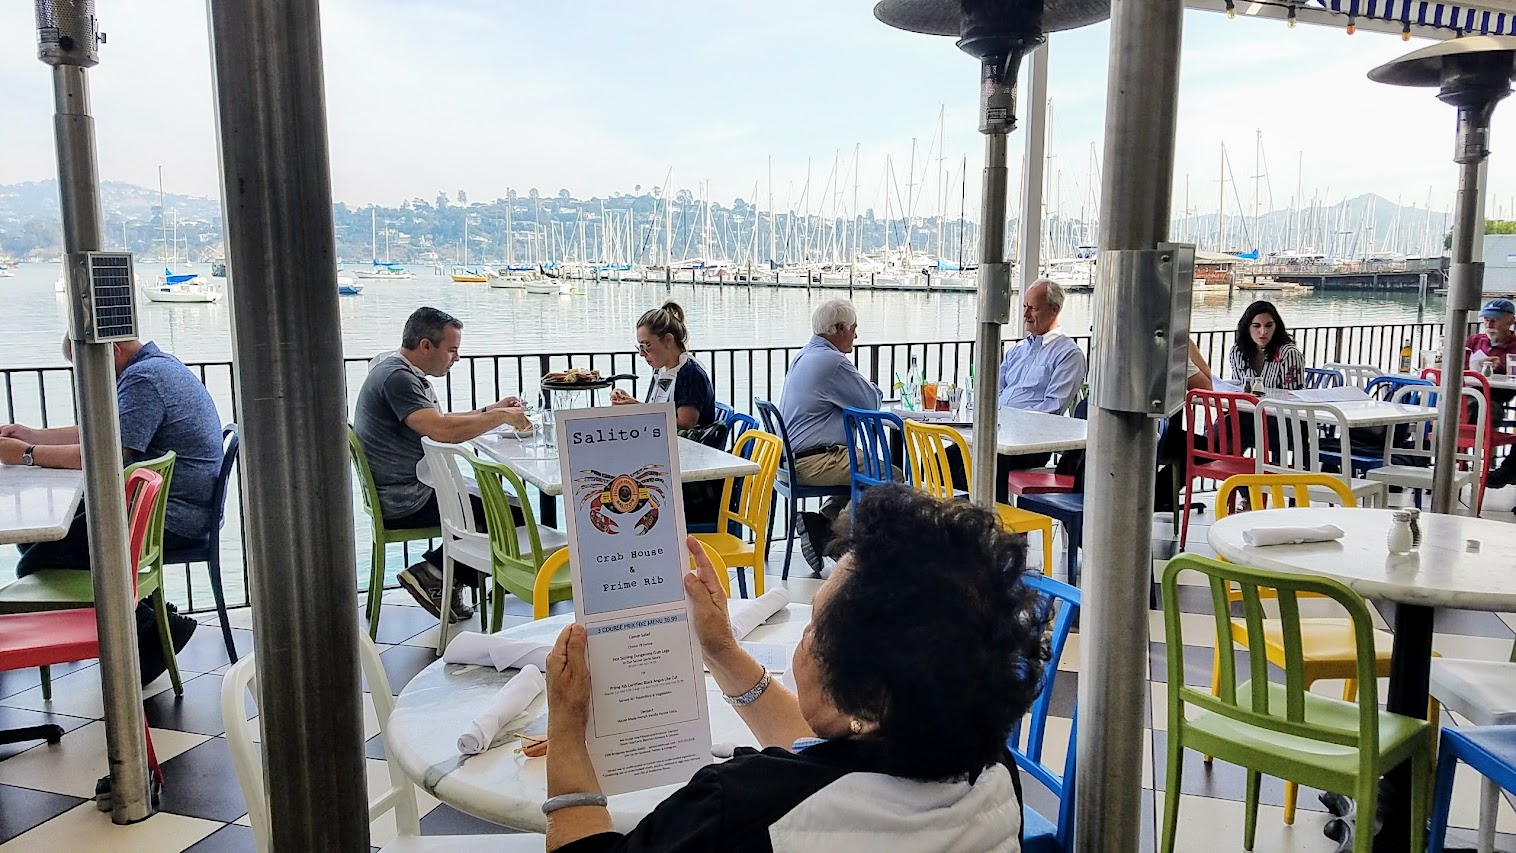 A Visit to Salito's Crabhouse in Sausalito